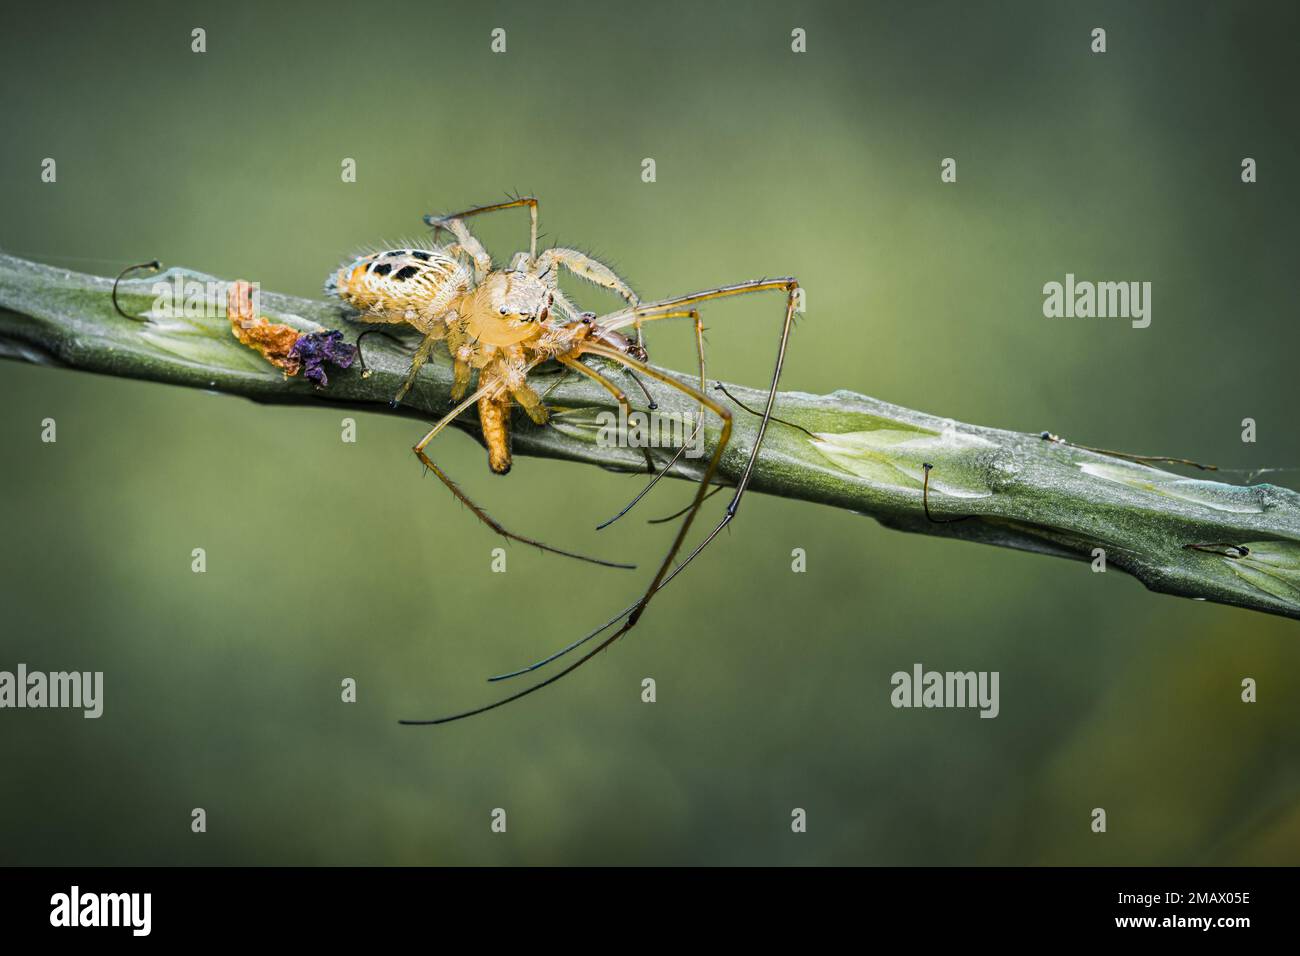 Jumping spider eating prey on green Stachytarpheta jamaicensis tree, Jumping spider and Lynx spider, Selective focus, Macro shot, Natural background, Stock Photo